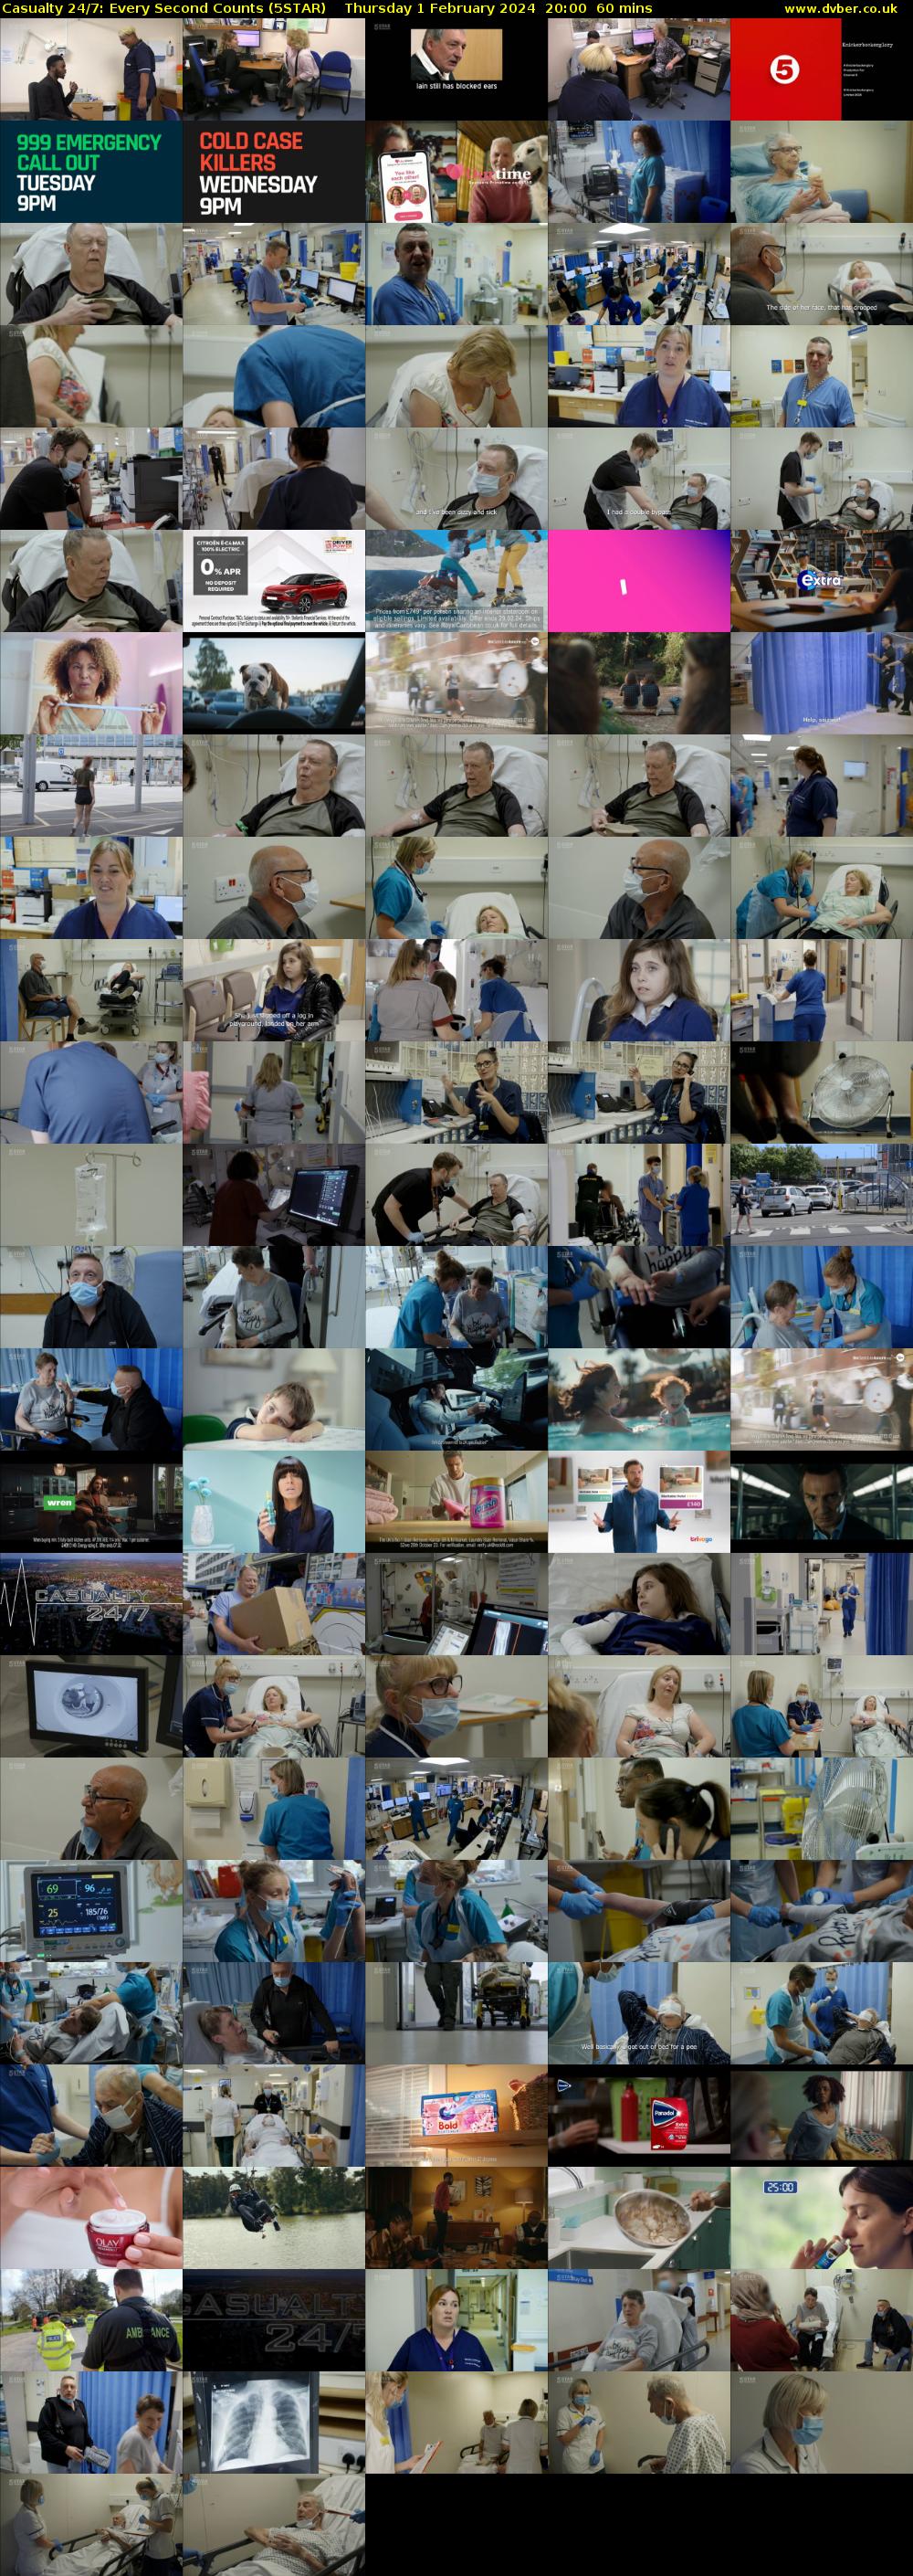 Casualty 24/7: Every Second Counts (5STAR) Thursday 1 February 2024 20:00 - 21:00